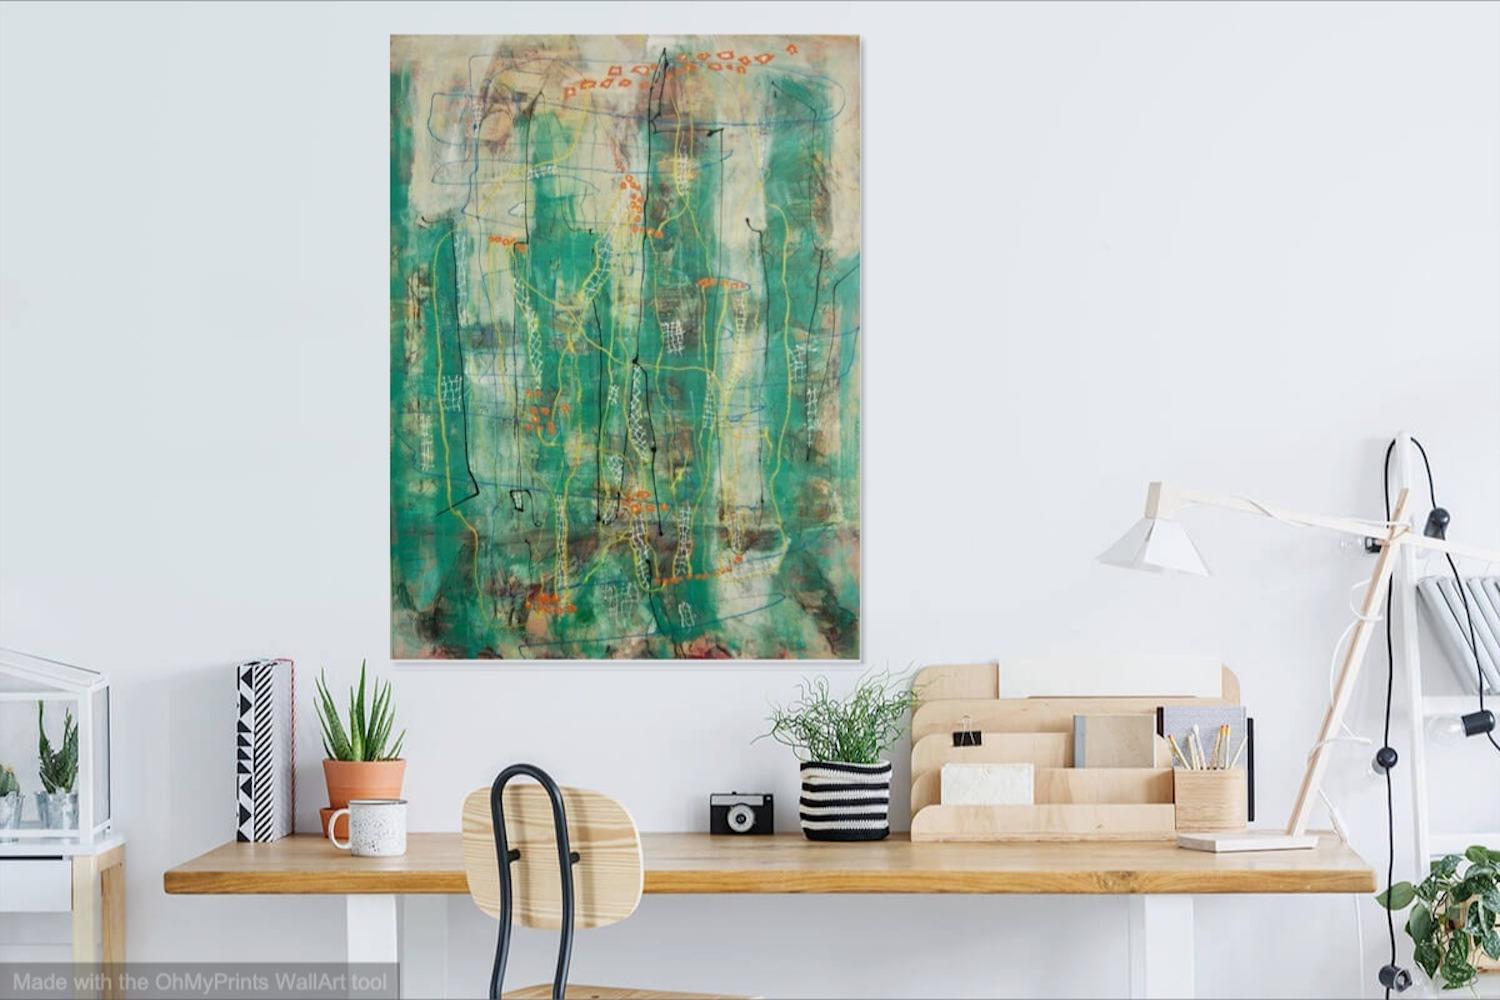 Abstract city buildings original painting in whimsical green shapes, a mixed media fine art mood artwork with atmospheric layers and collage